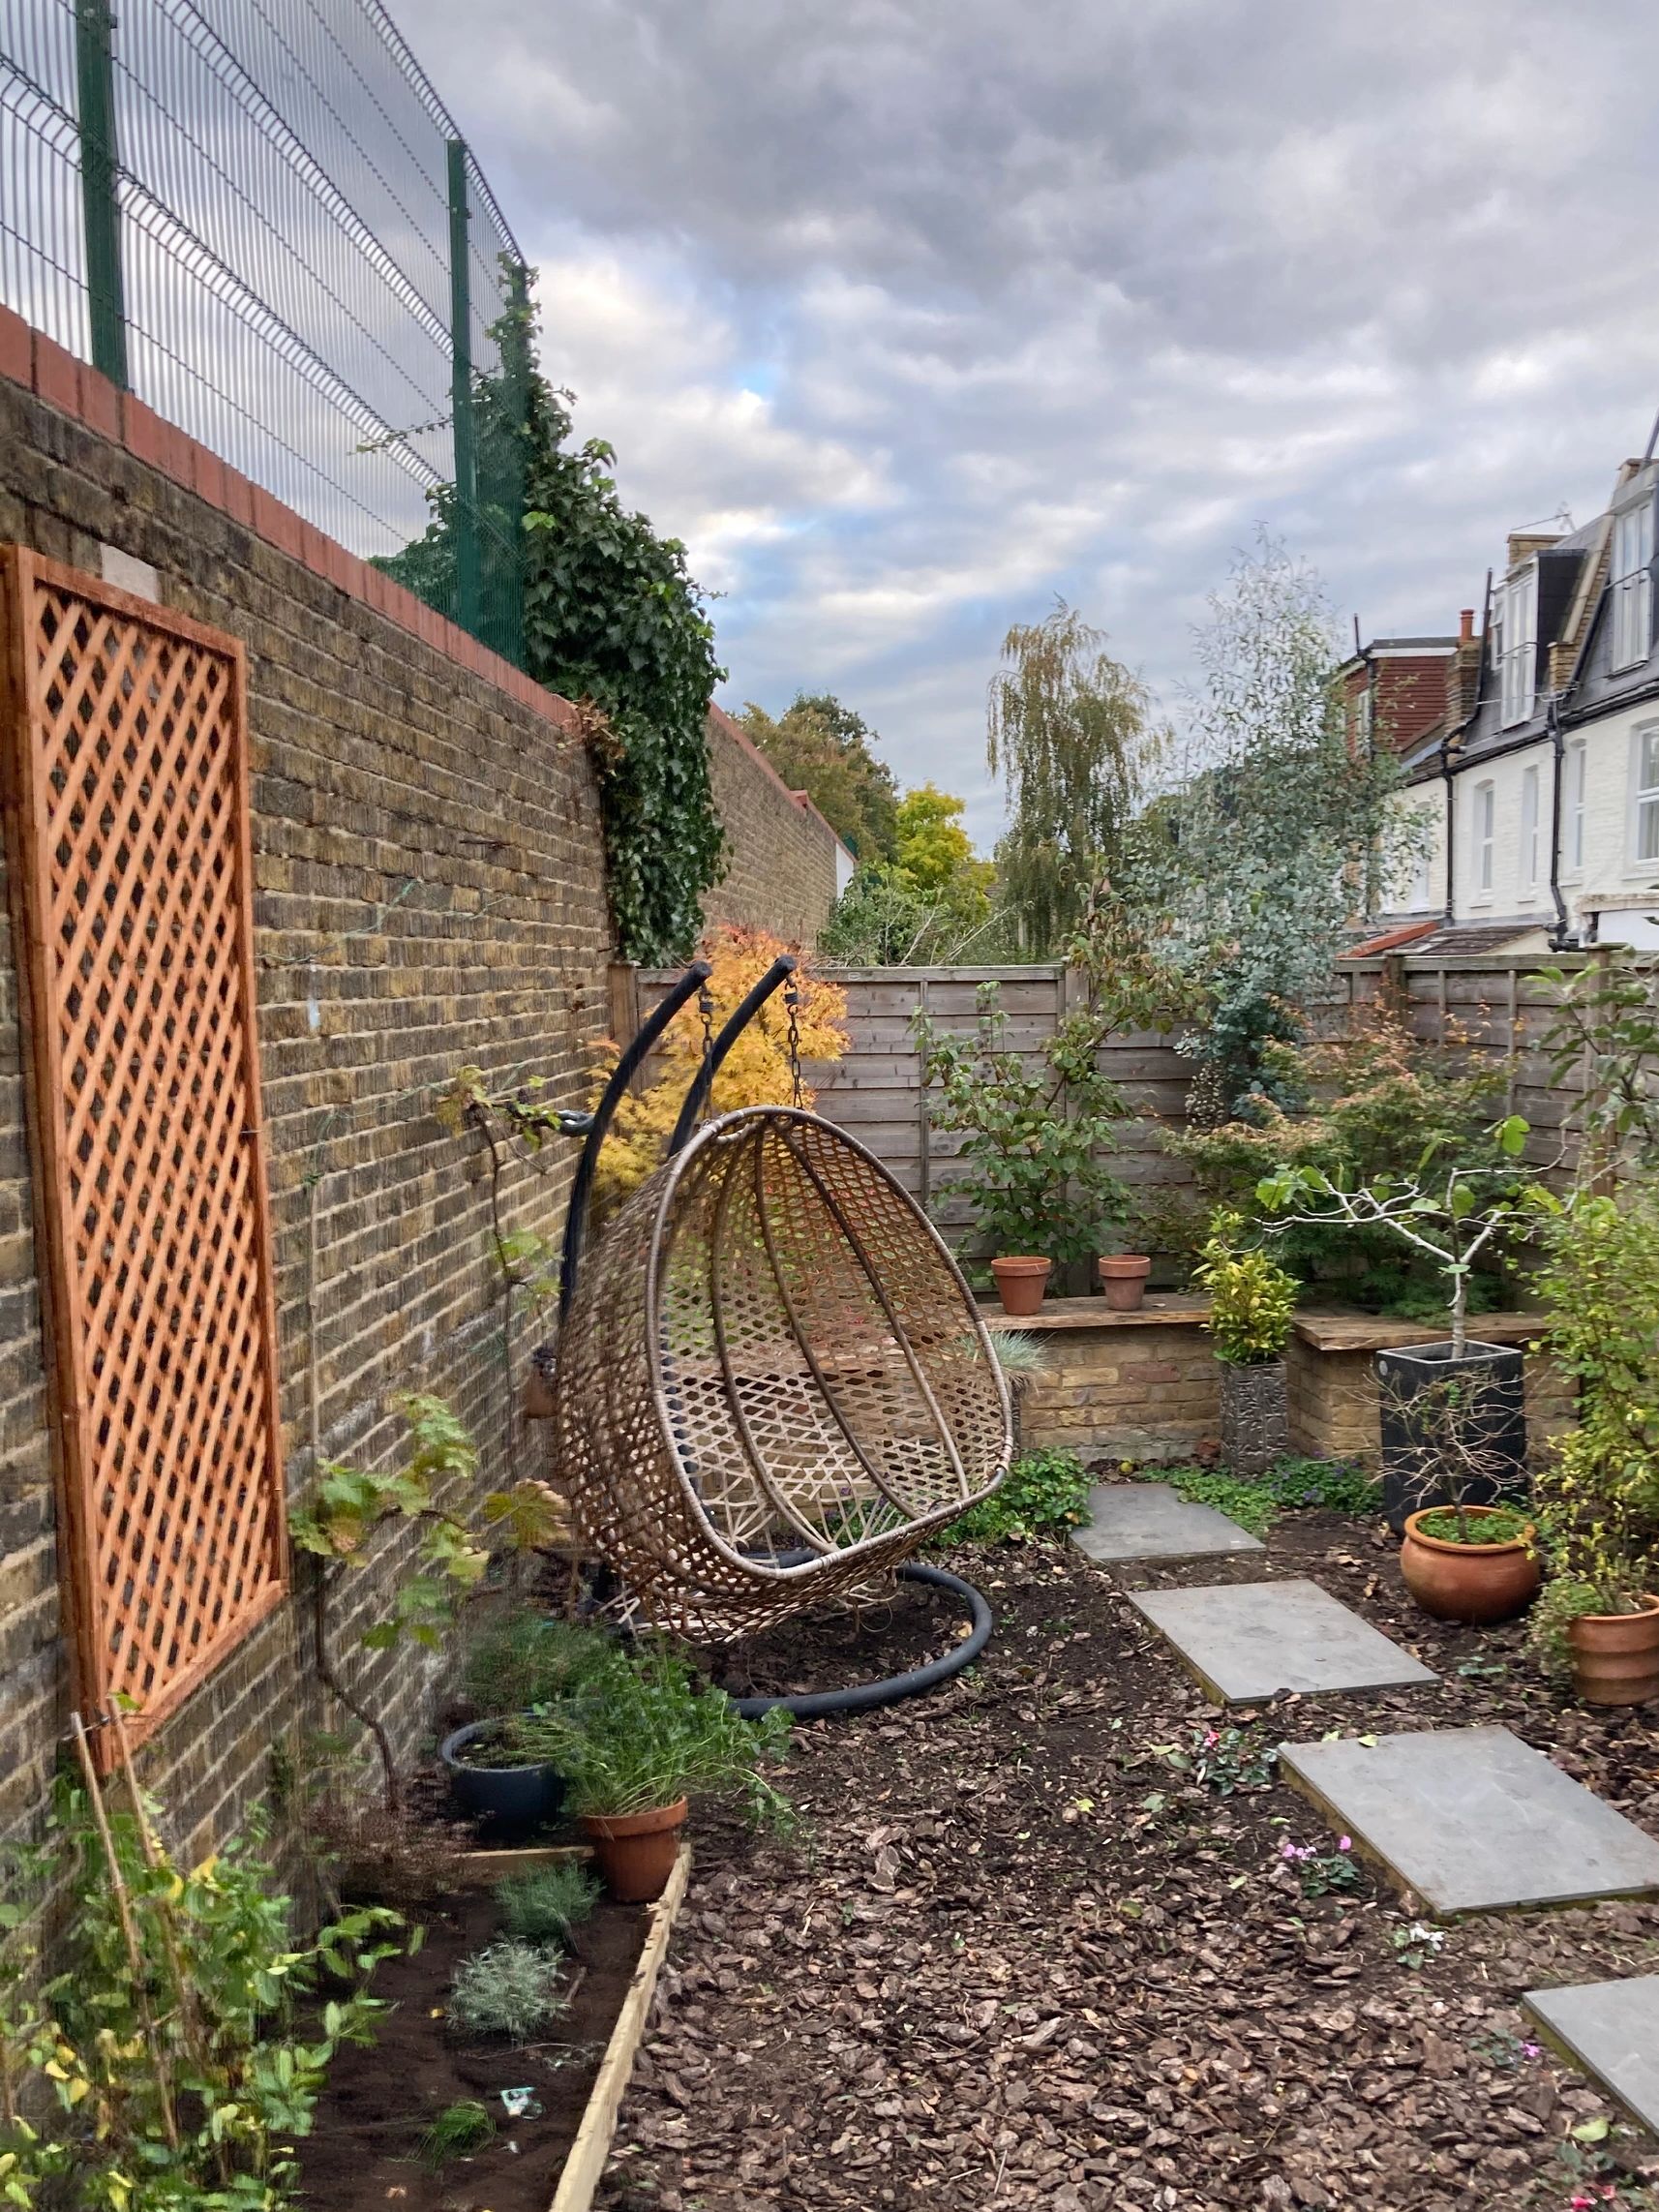 Wooden rocking chair in a small urban garden setting with freshly laid bark and raised bed.